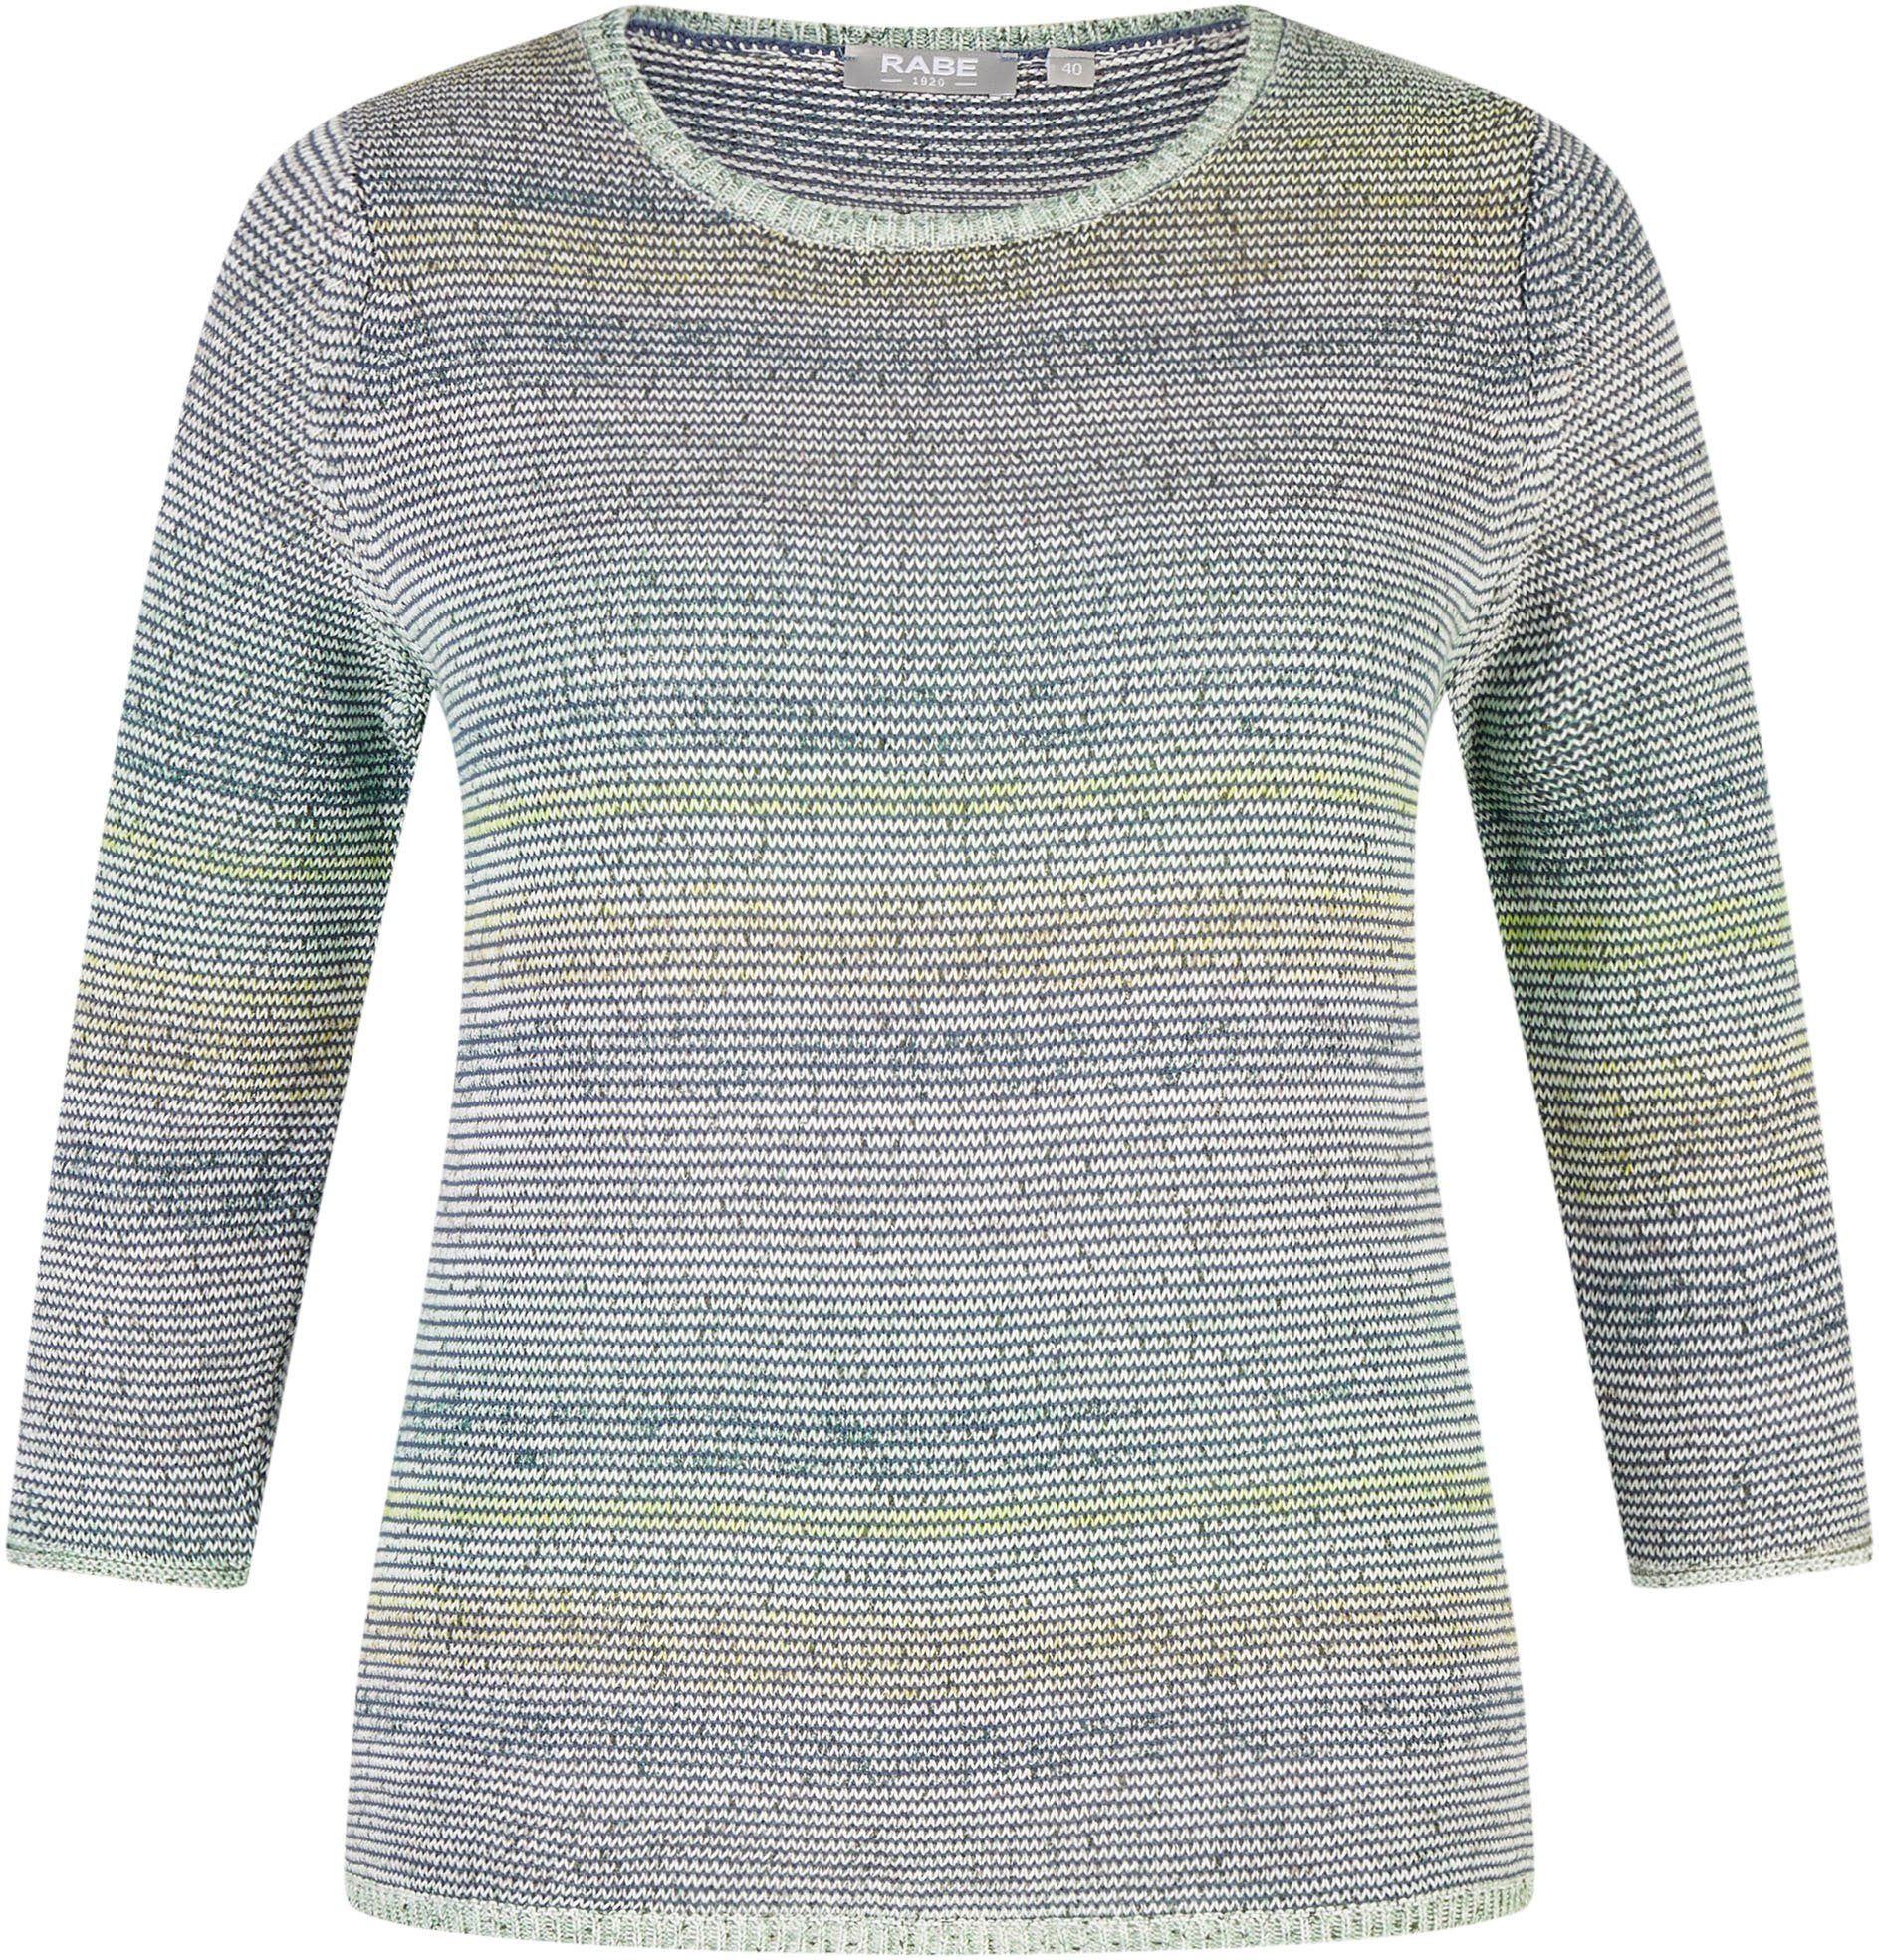 Strickpullover Rabe MODEN,Pullover RABE